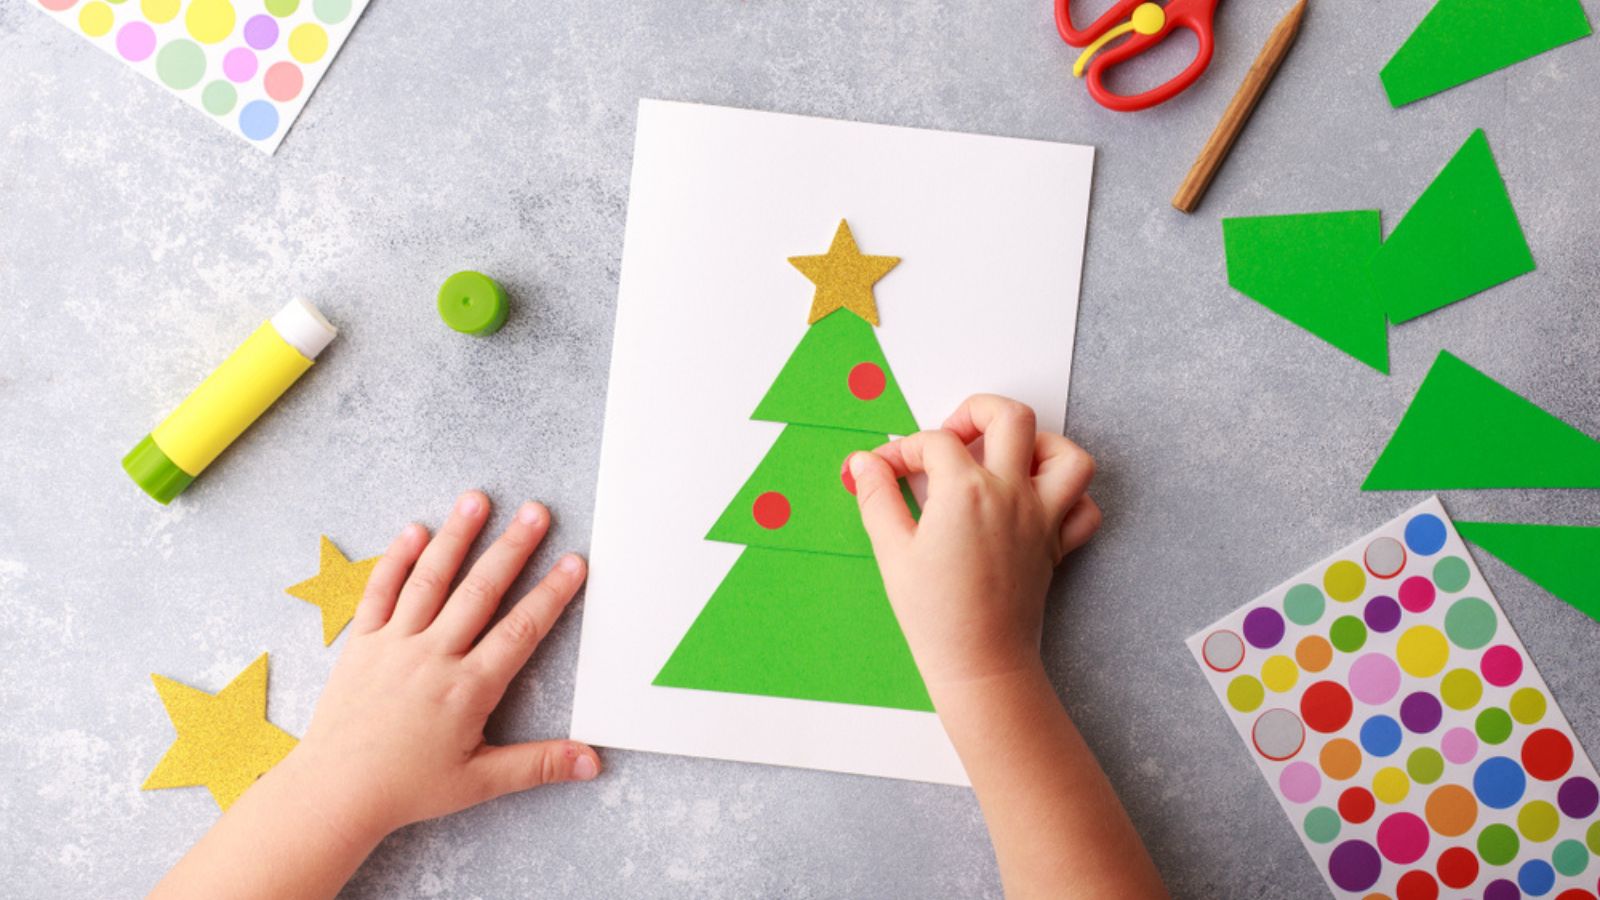 20 Adorable Popsicle Stick Christmas Crafts For Your Kids to Make